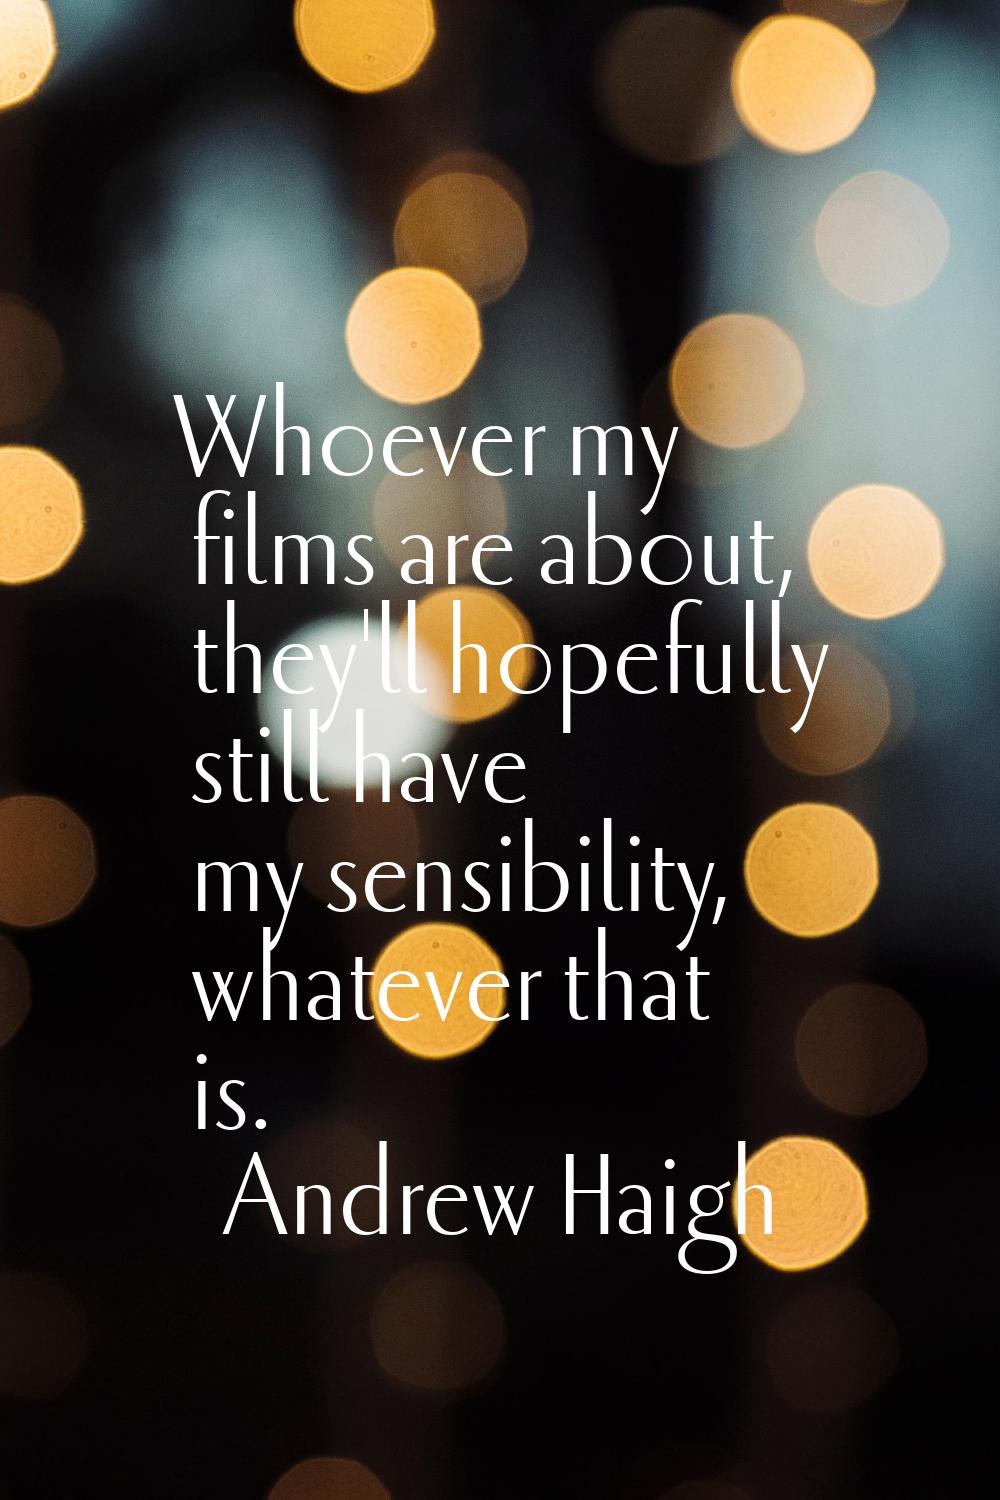 Whoever my films are about, they'll hopefully still have my sensibility, whatever that is.